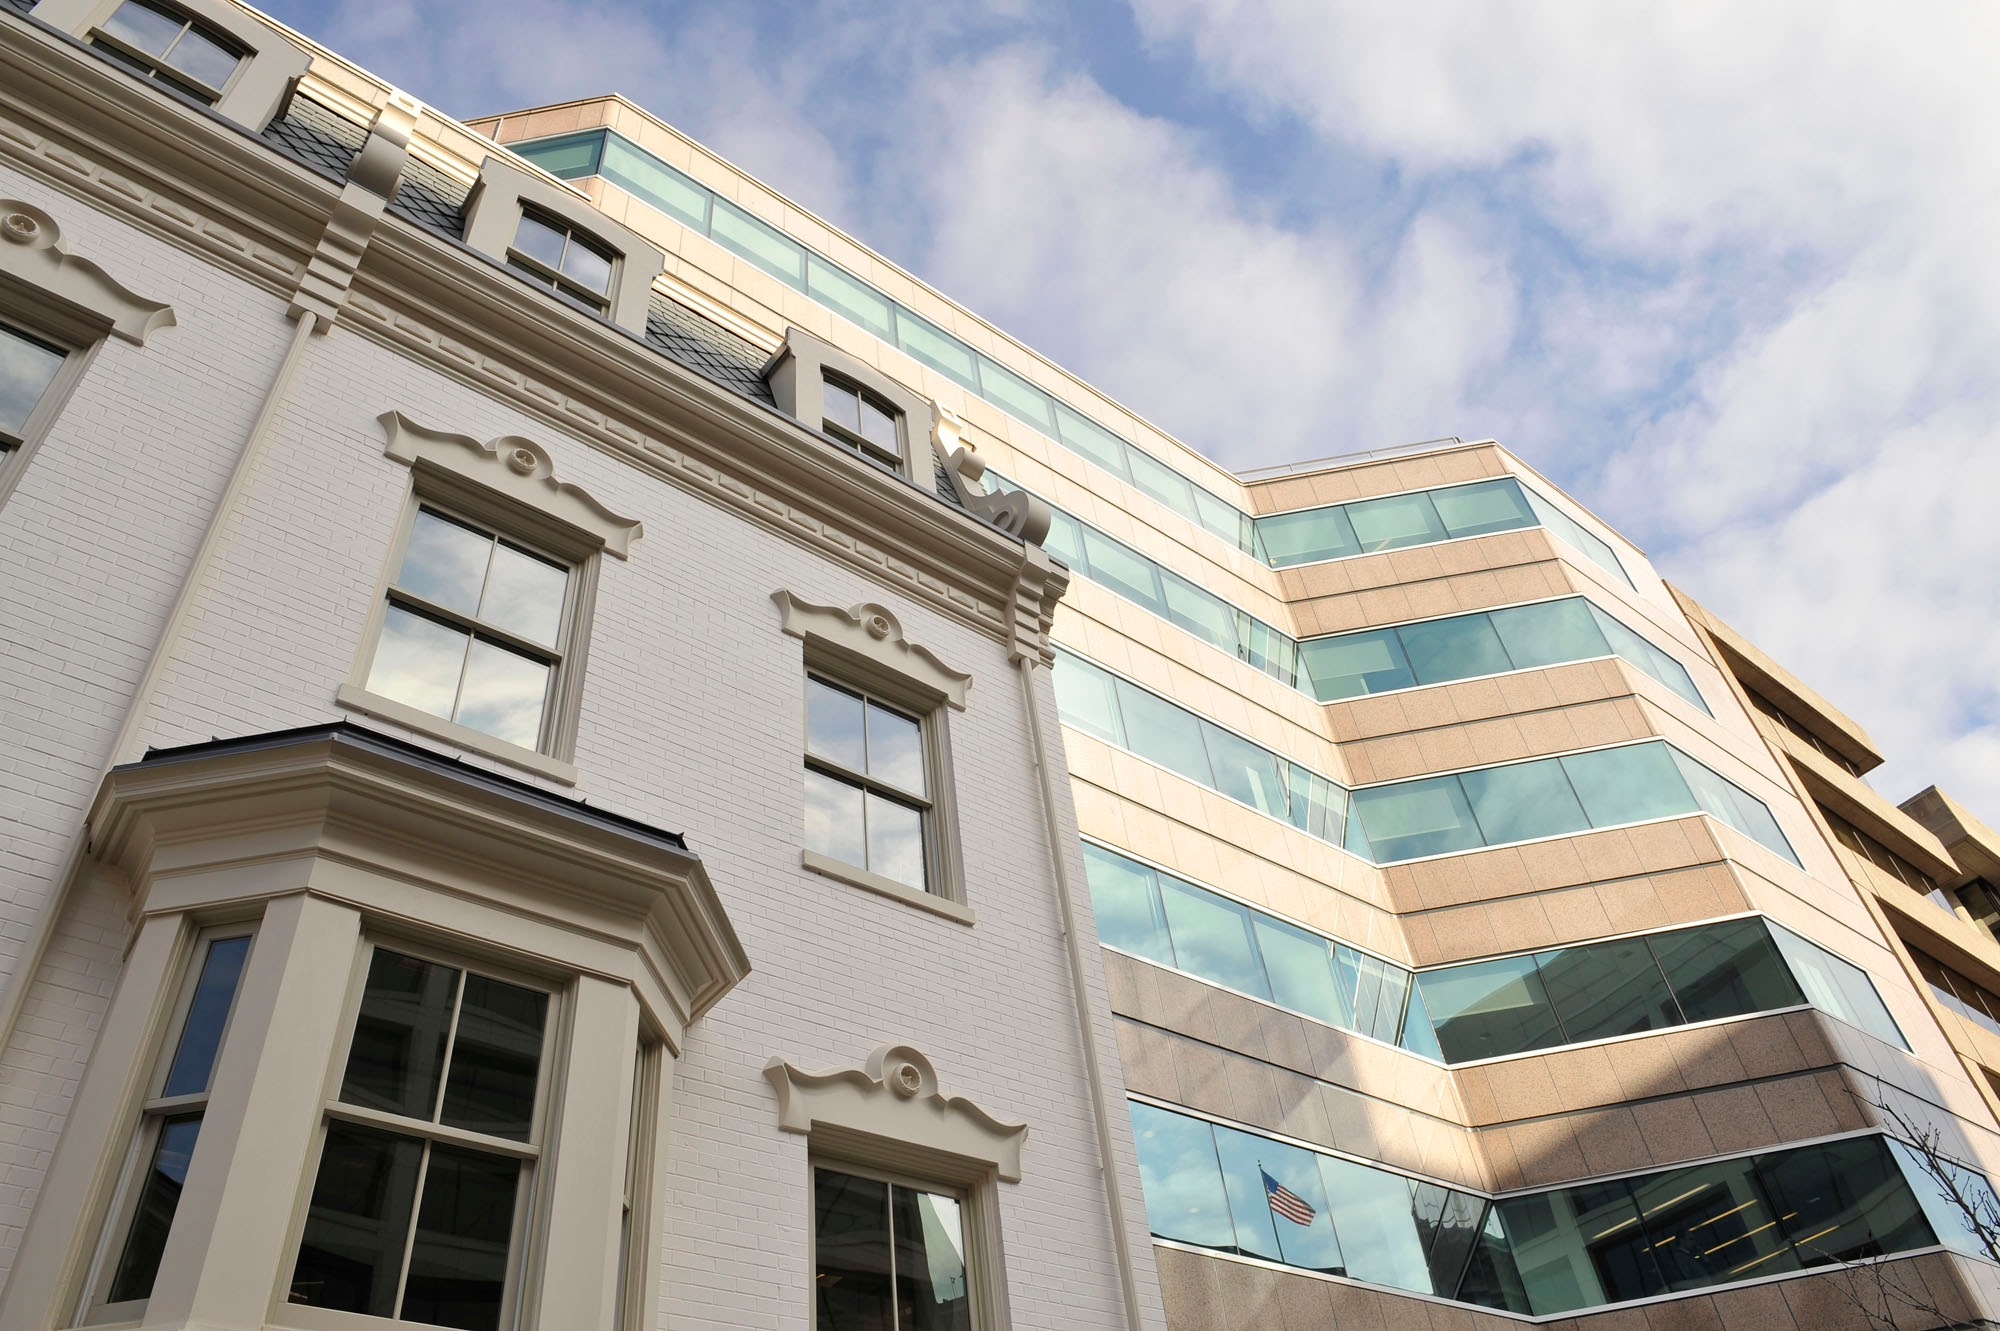 CFR building in Washington, DC, at 1777 F Street opens in January